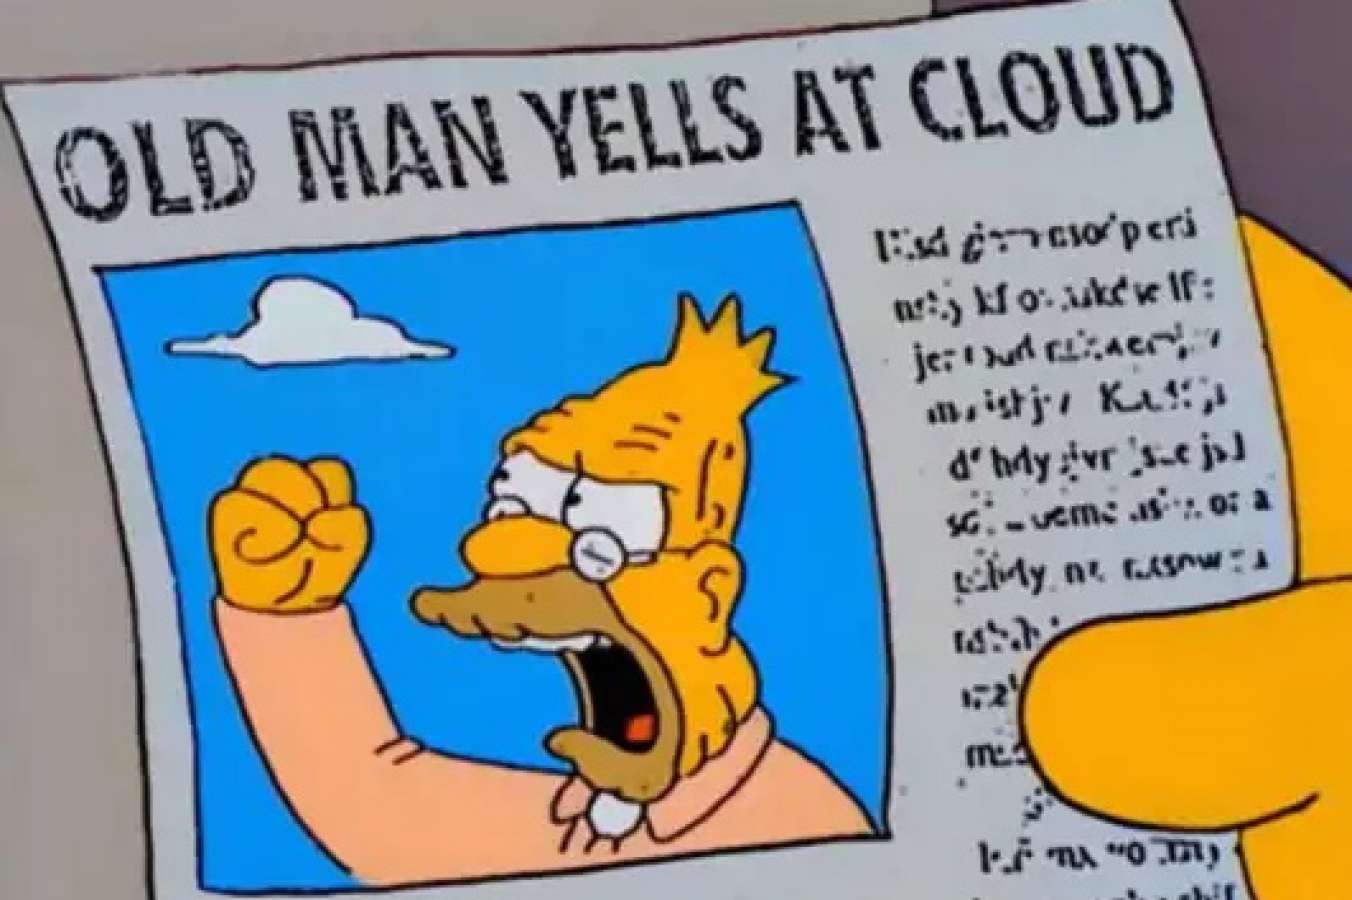 the-old-man-yelling-at-cloud--1560141714_1352x900.jpg